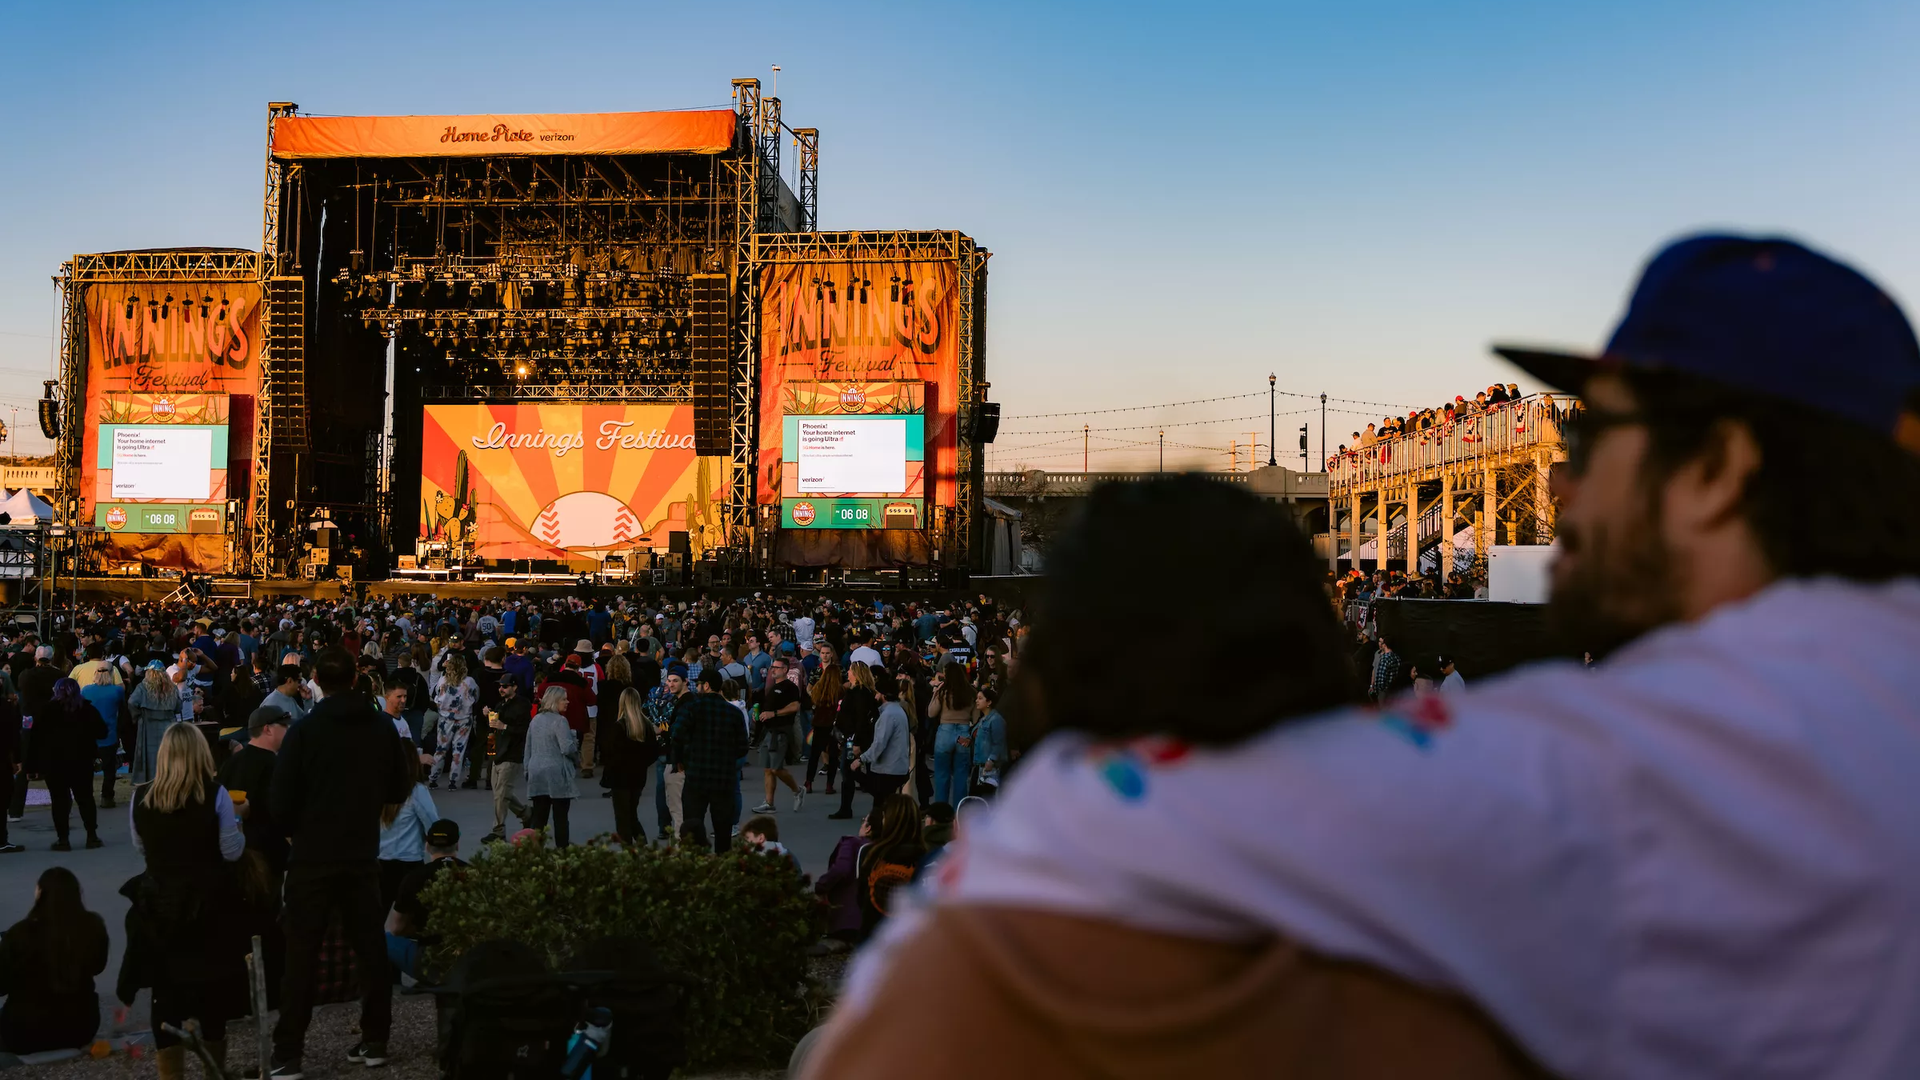 A music festival crowd in front of a stage at sundown